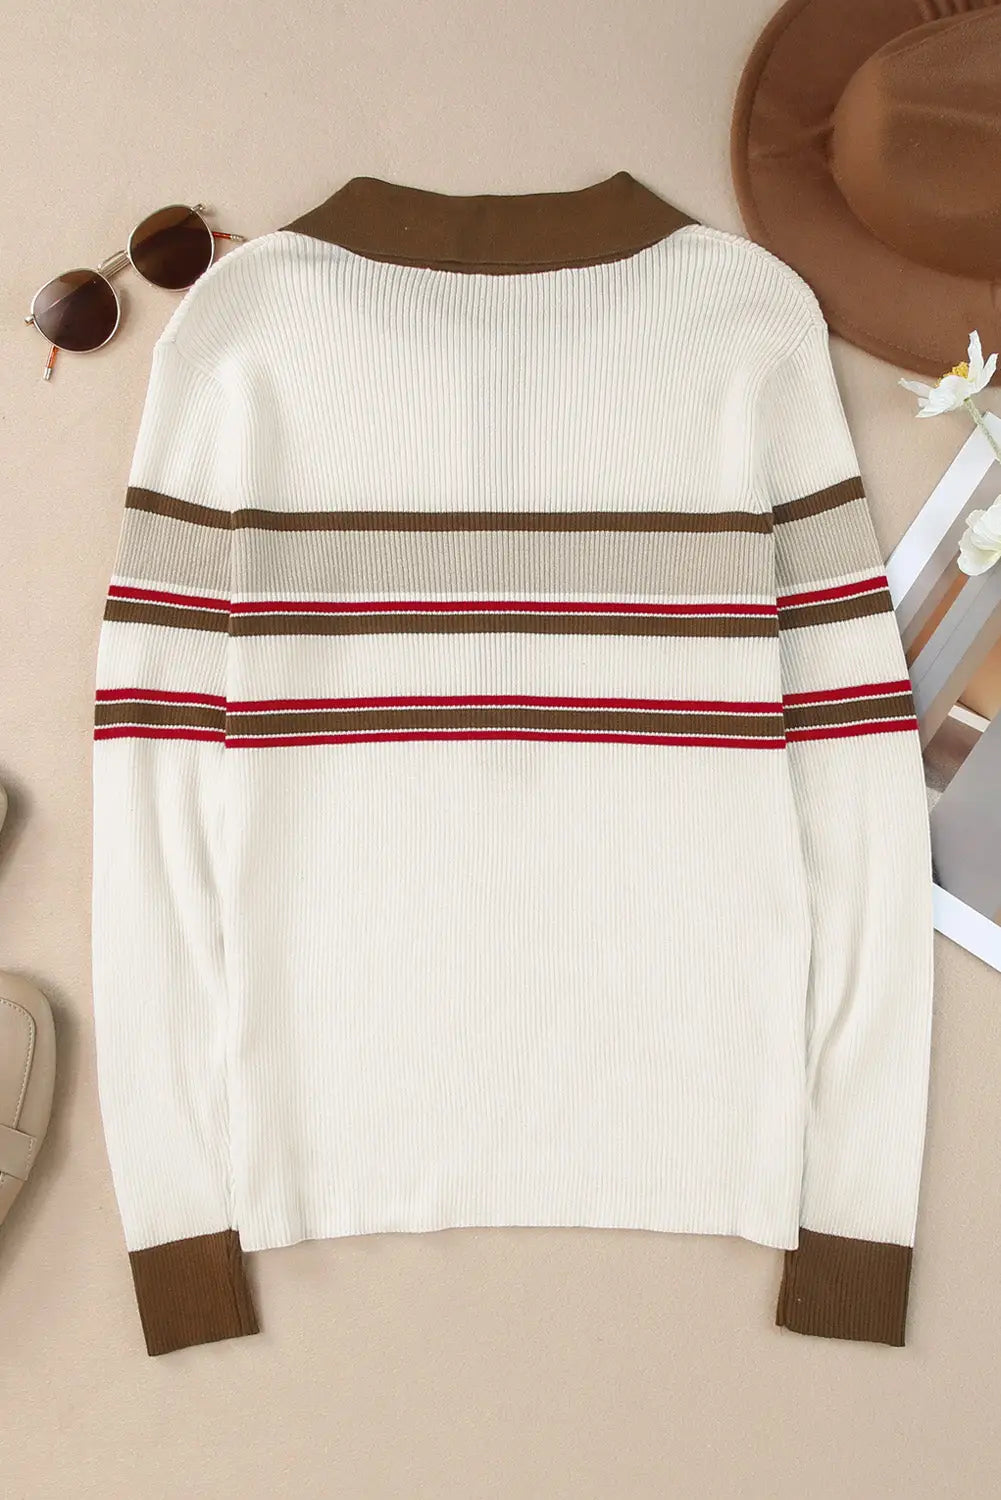 Black rib knitted stripe detail henley sweater - sweaters & cardigans